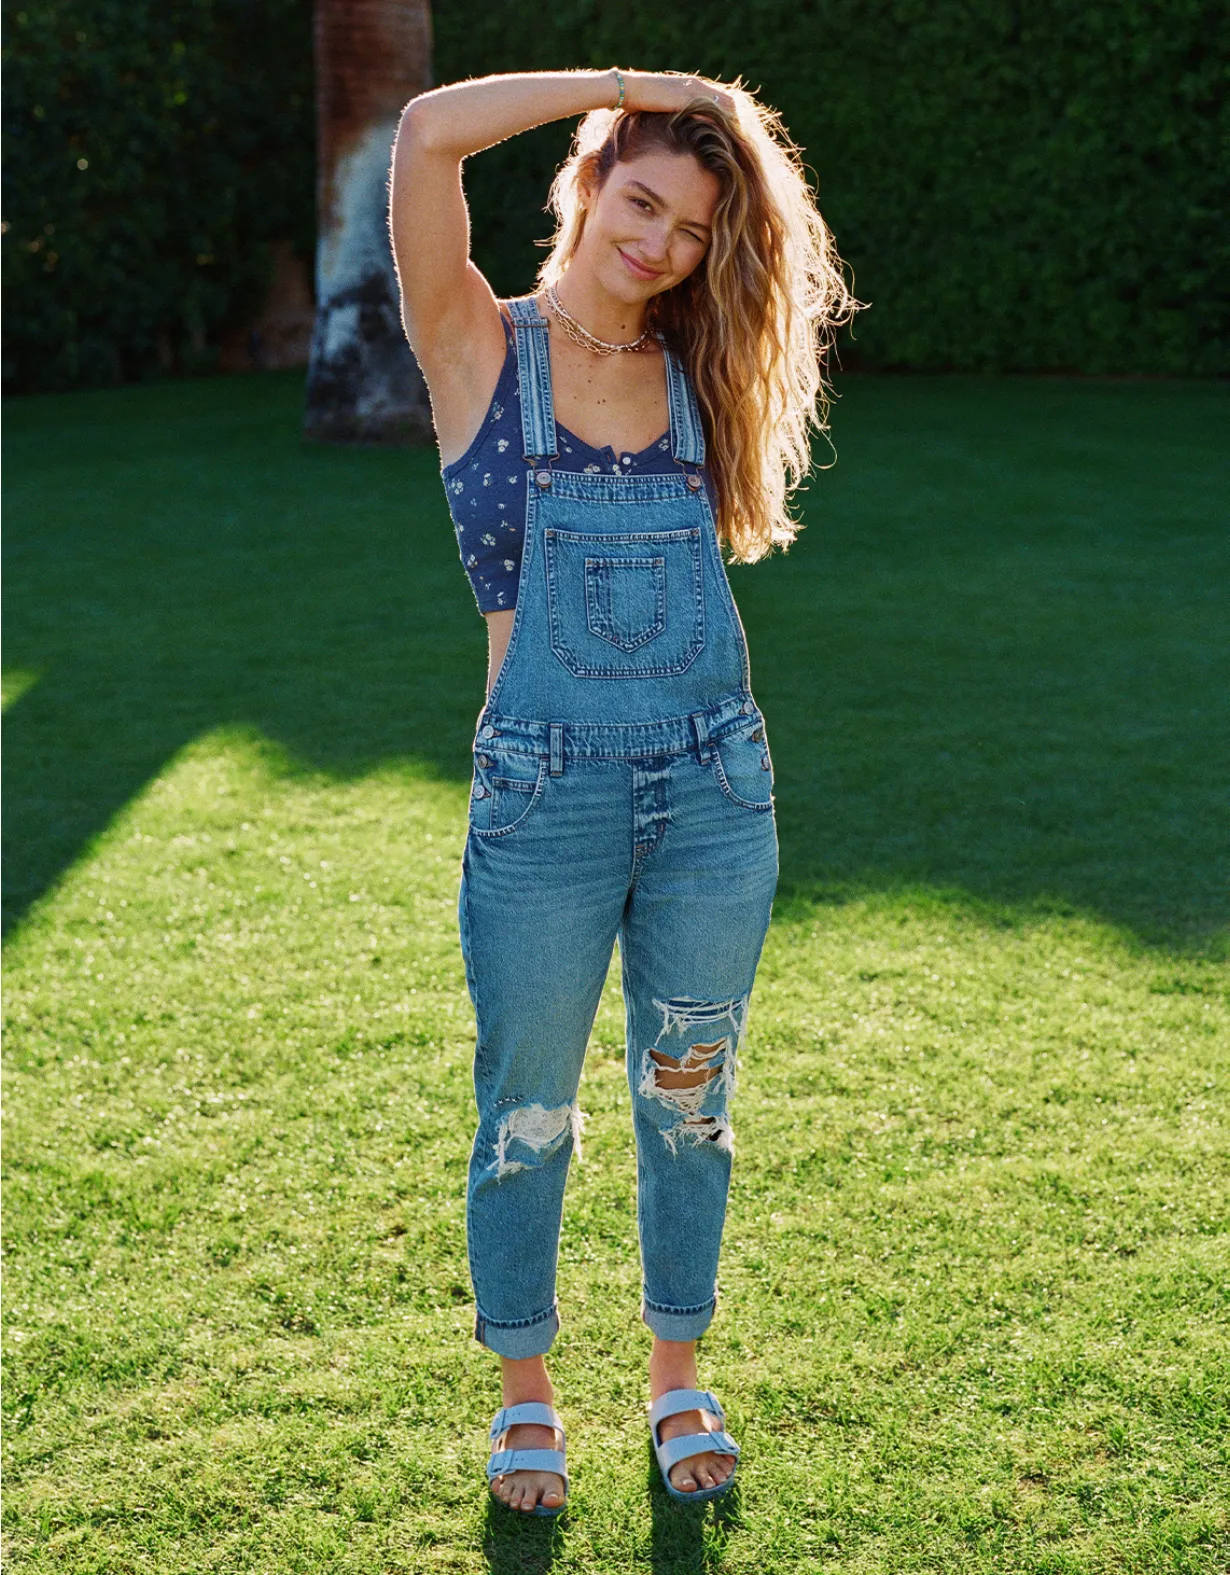 AE Ripped Denim Tomgirl Overall